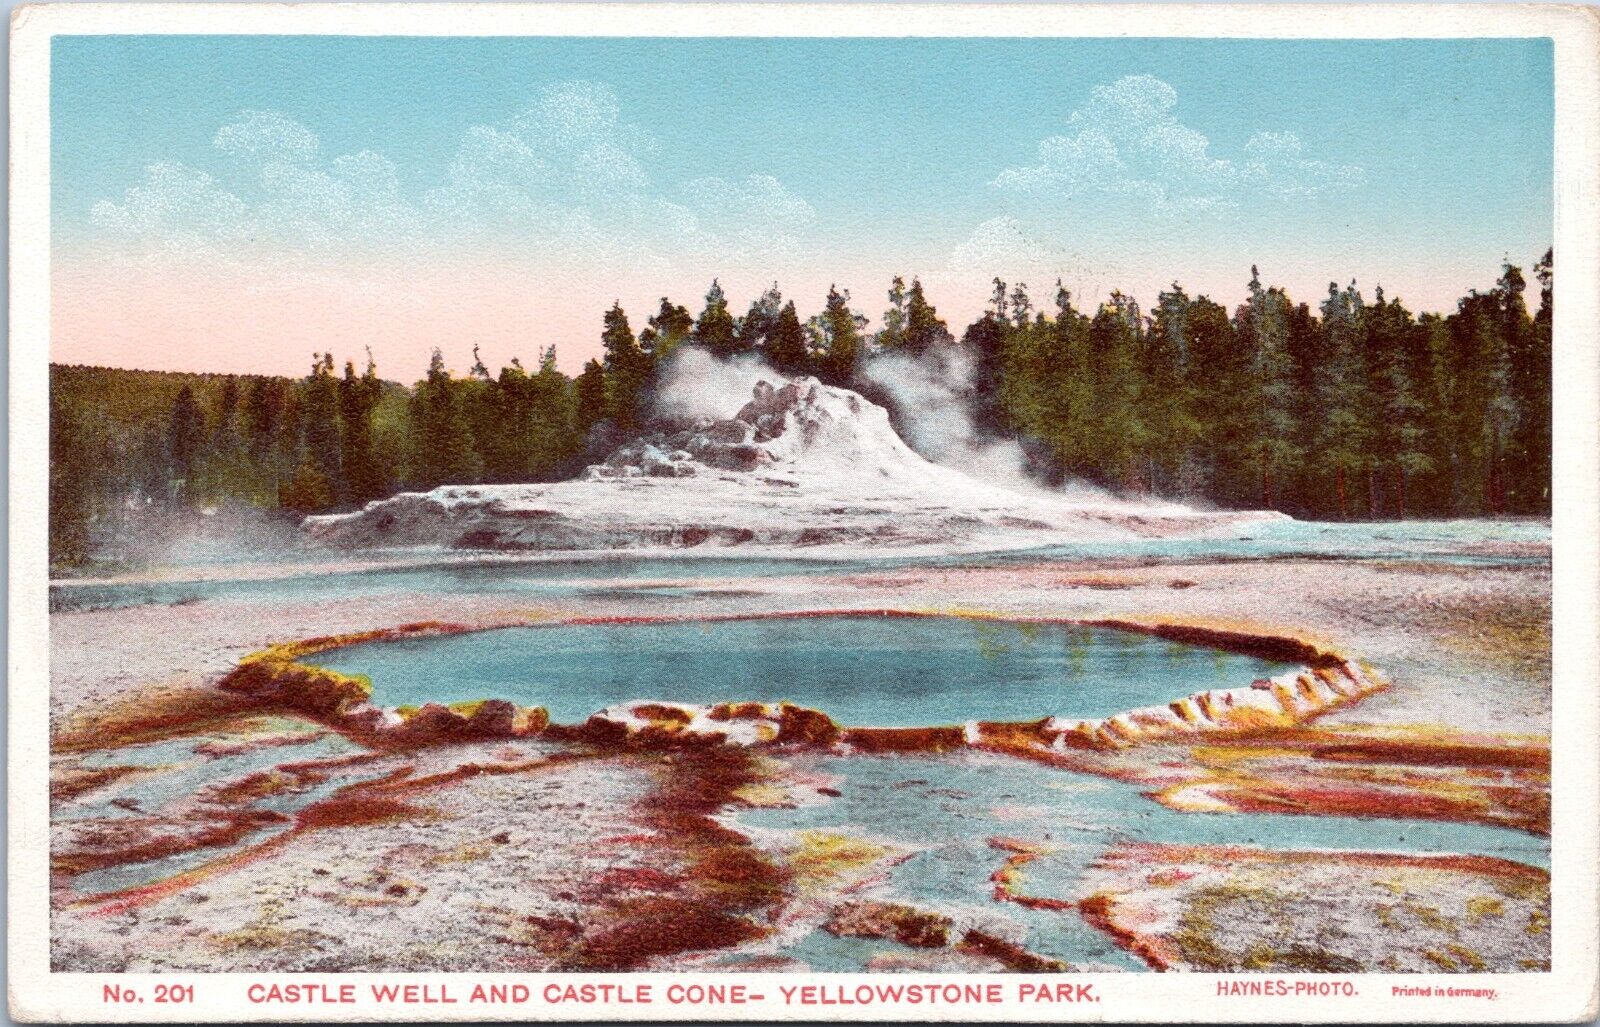 Castle Well, Castle Cone, Yellowstone Park, Wyoming - Haynes Photo Postcard 201